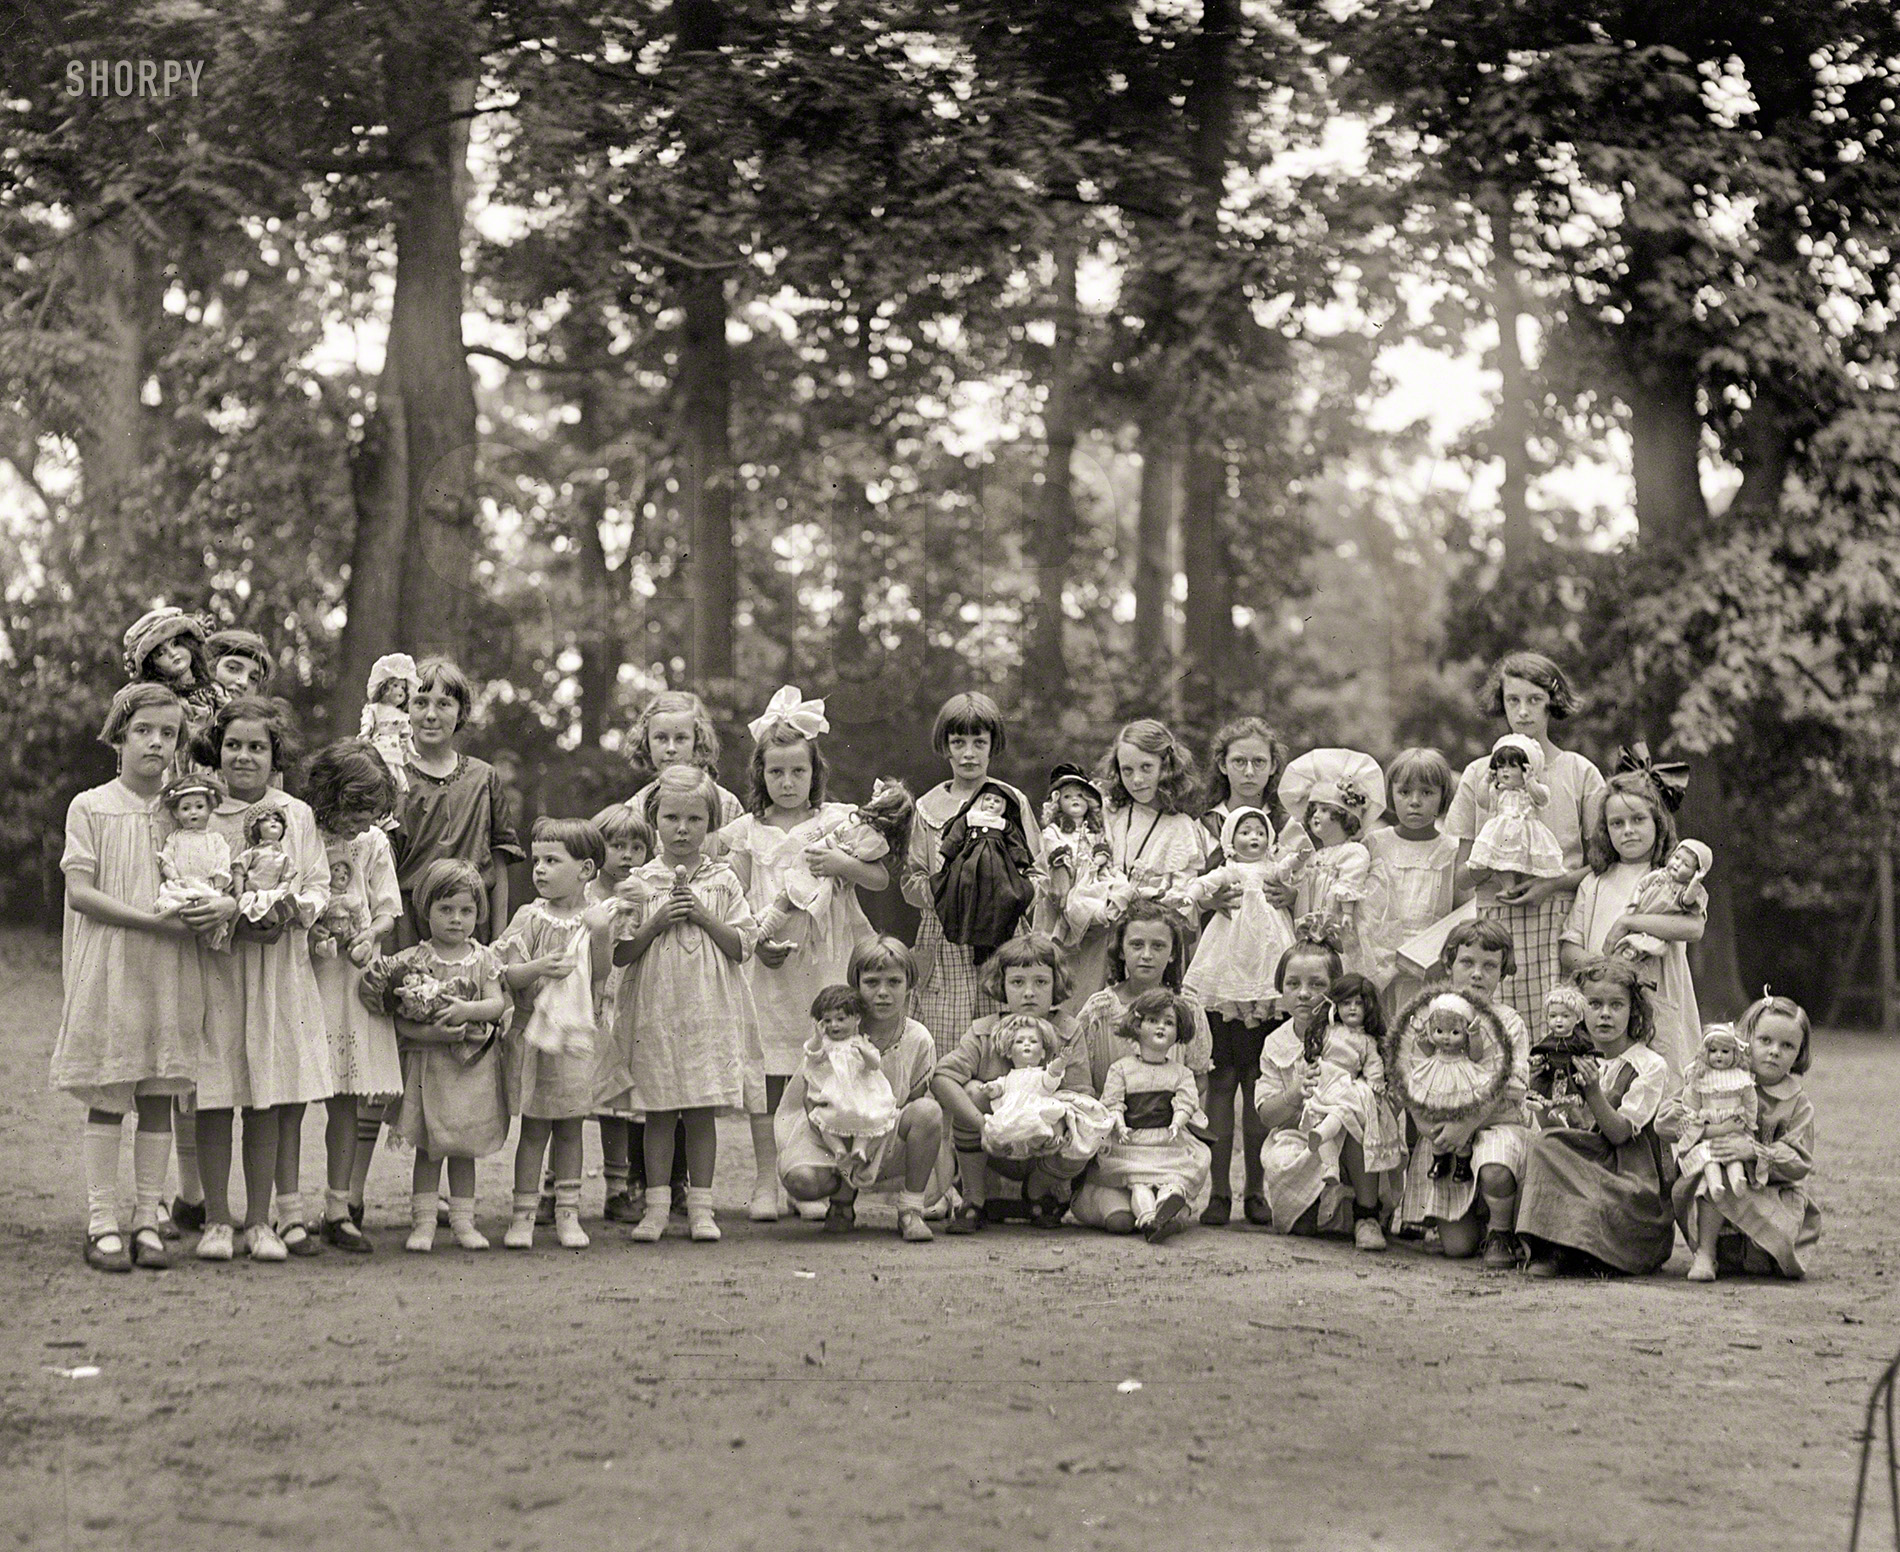 July 11, 1923. "Montrose play grounds (girls with dolls)." By now presumably all safely back in their toy boxes. National Photo glass negative. View full size.